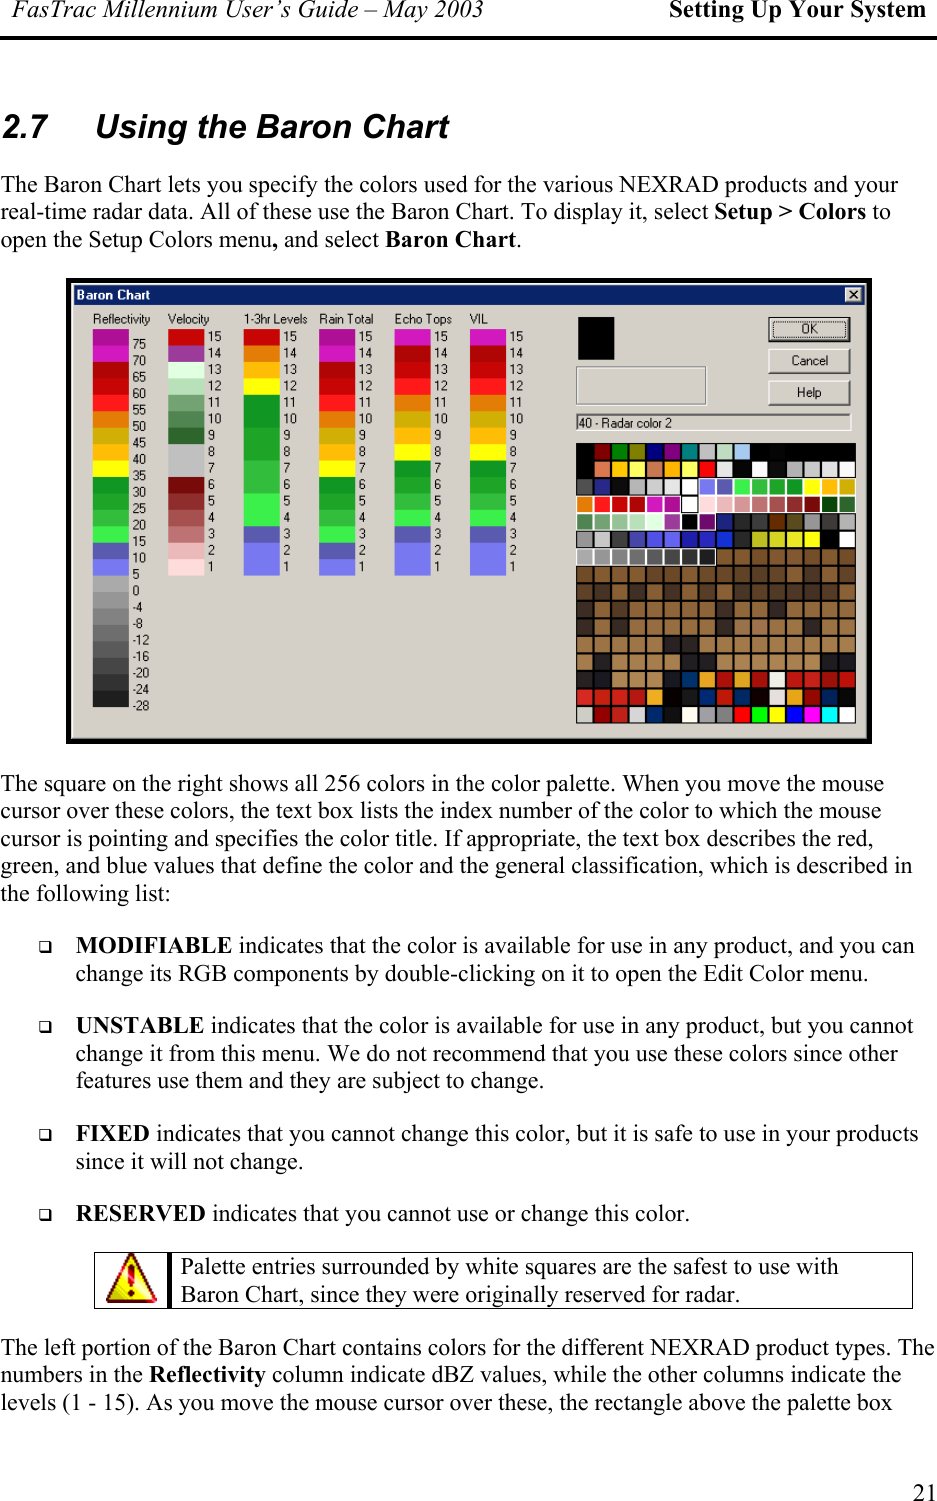 FasTrac Millennium User’s Guide – May 2003 Setting Up Your System 2.7  Using the Baron Chart  The Baron Chart lets you specify the colors used for the various NEXRAD products and your real-time radar data. All of these use the Baron Chart. To display it, select Setup &gt; Colors to open the Setup Colors menu, and select Baron Chart.  The square on the right shows all 256 colors in the color palette. When you move the mouse cursor over these colors, the text box lists the index number of the color to which the mouse cursor is pointing and specifies the color title. If appropriate, the text box describes the red, green, and blue values that define the color and the general classification, which is described in the following list:   MODIFIABLE indicates that the color is available for use in any product, and you can change its RGB components by double-clicking on it to open the Edit Color menu.   UNSTABLE indicates that the color is available for use in any product, but you cannot change it from this menu. We do not recommend that you use these colors since other features use them and they are subject to change.   FIXED indicates that you cannot change this color, but it is safe to use in your products since it will not change.   RESERVED indicates that you cannot use or change this color.  Palette entries surrounded by white squares are the safest to use with Baron Chart, since they were originally reserved for radar.  The left portion of the Baron Chart contains colors for the different NEXRAD product types. The numbers in the Reflectivity column indicate dBZ values, while the other columns indicate the levels (1 - 15). As you move the mouse cursor over these, the rectangle above the palette box 21 